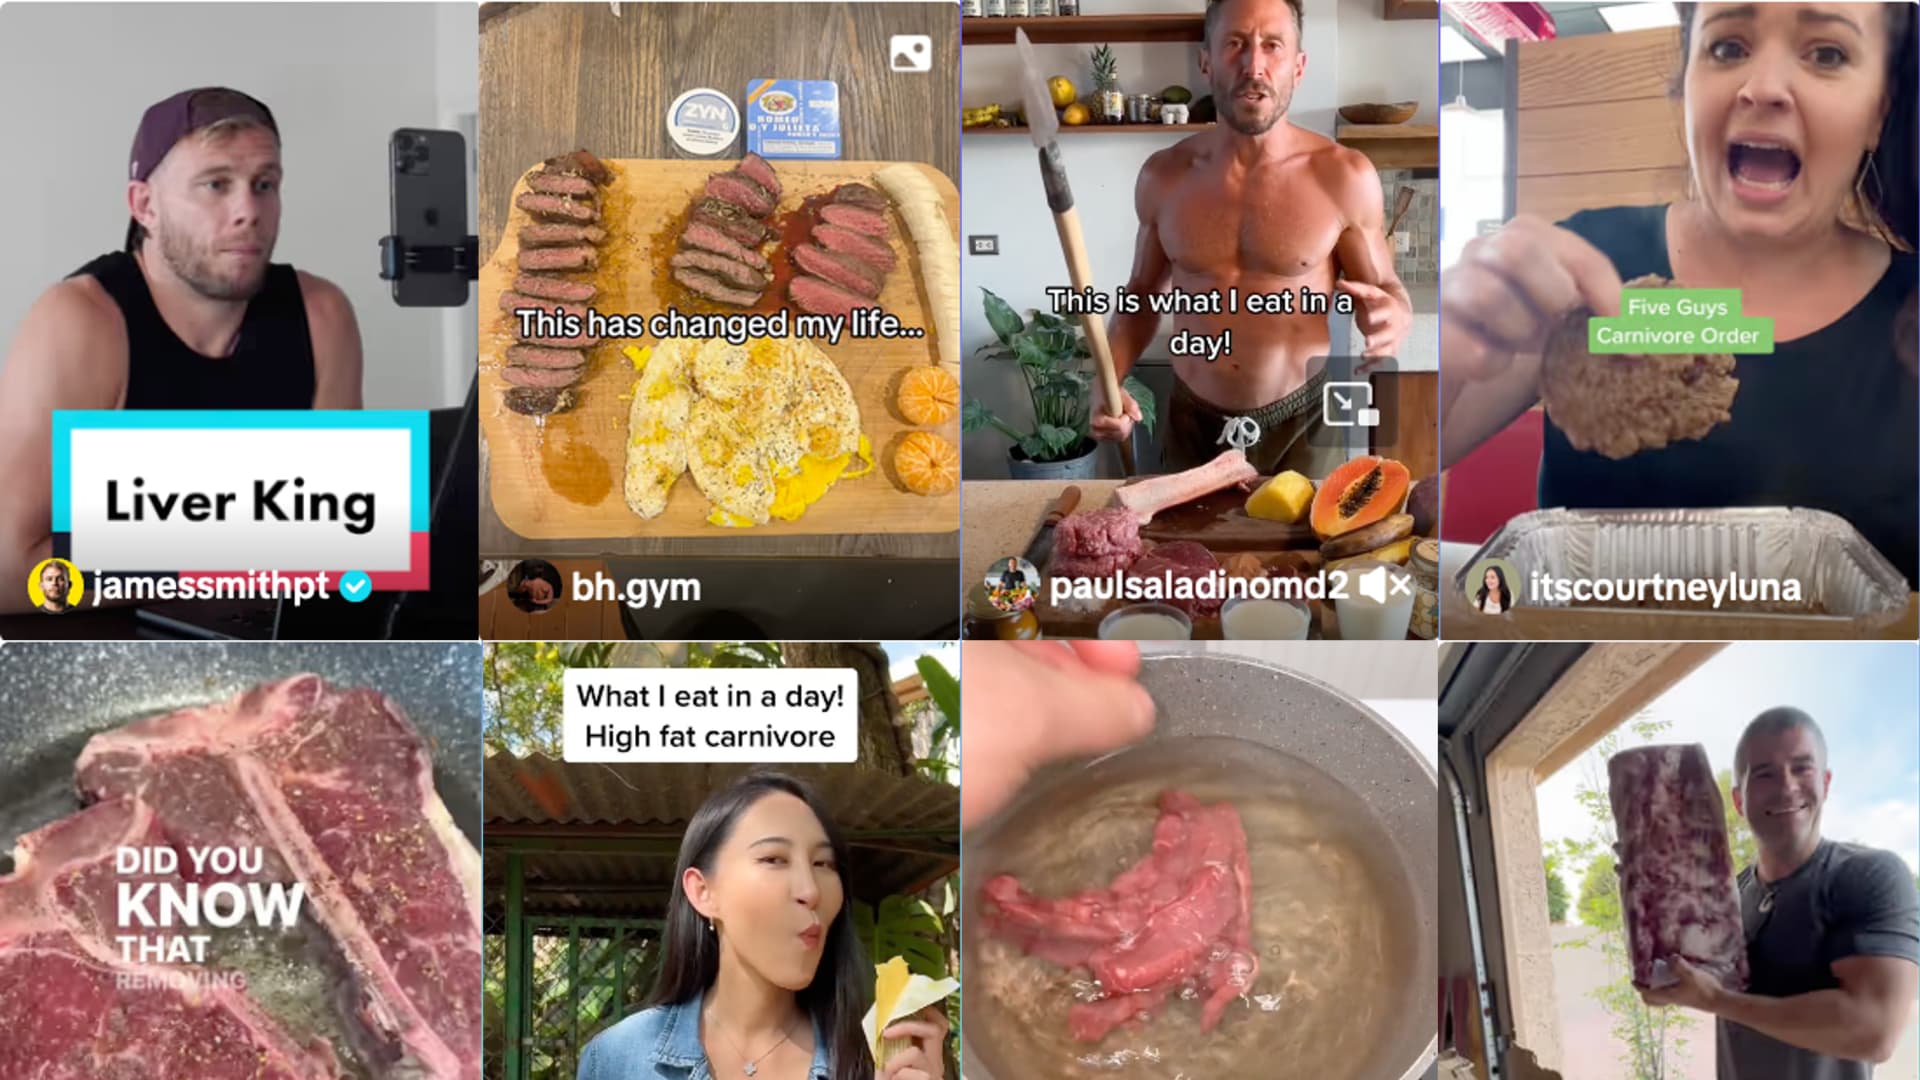 Fitness influencers swear by the 'carnivore diet'—it's 'basically a terrible idea,' doctor says - CNBC